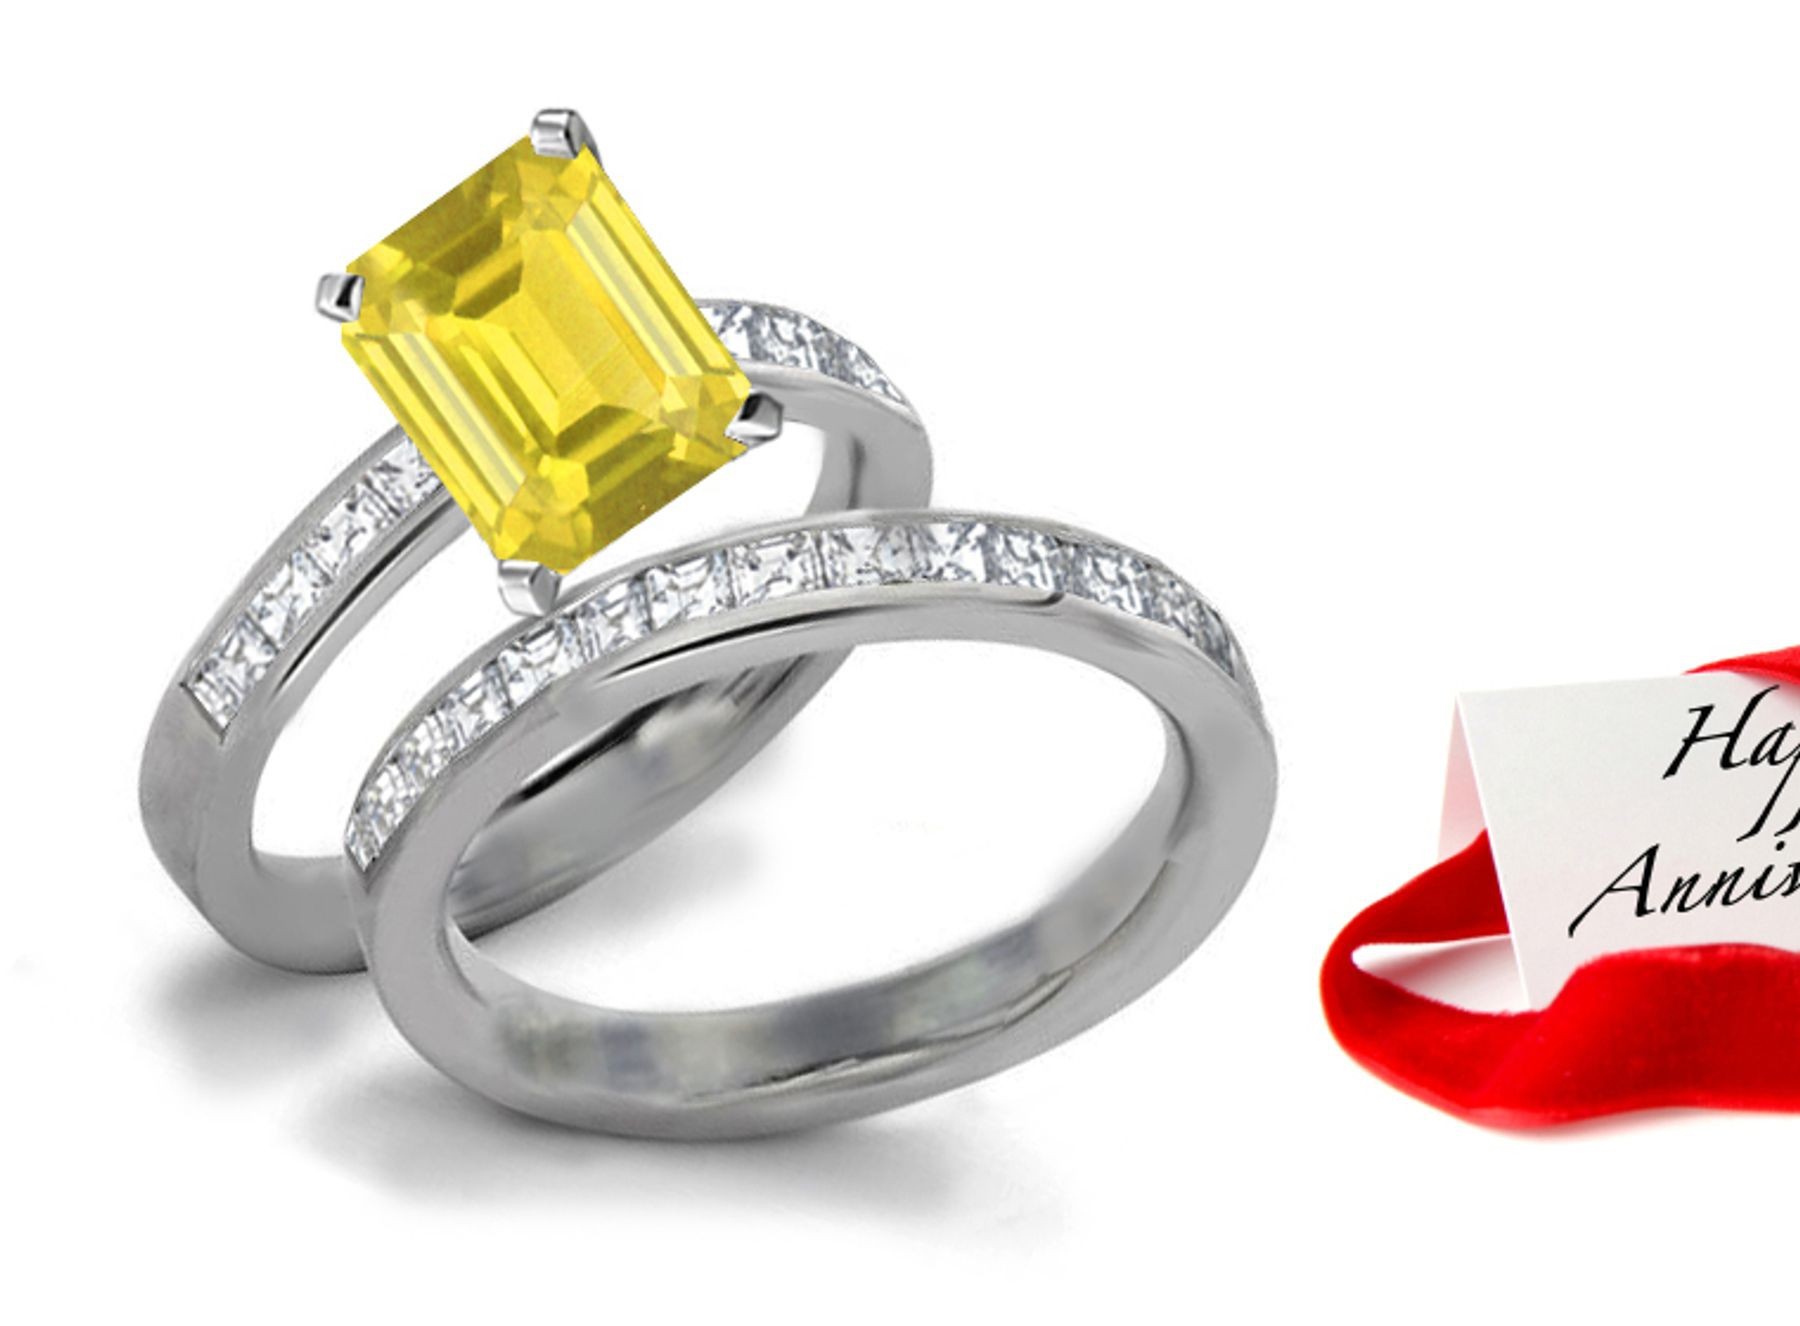 Design & Style: Lively Bright Yellow Sapphire & Sparkling Diamond Engagement & Wedding Bands